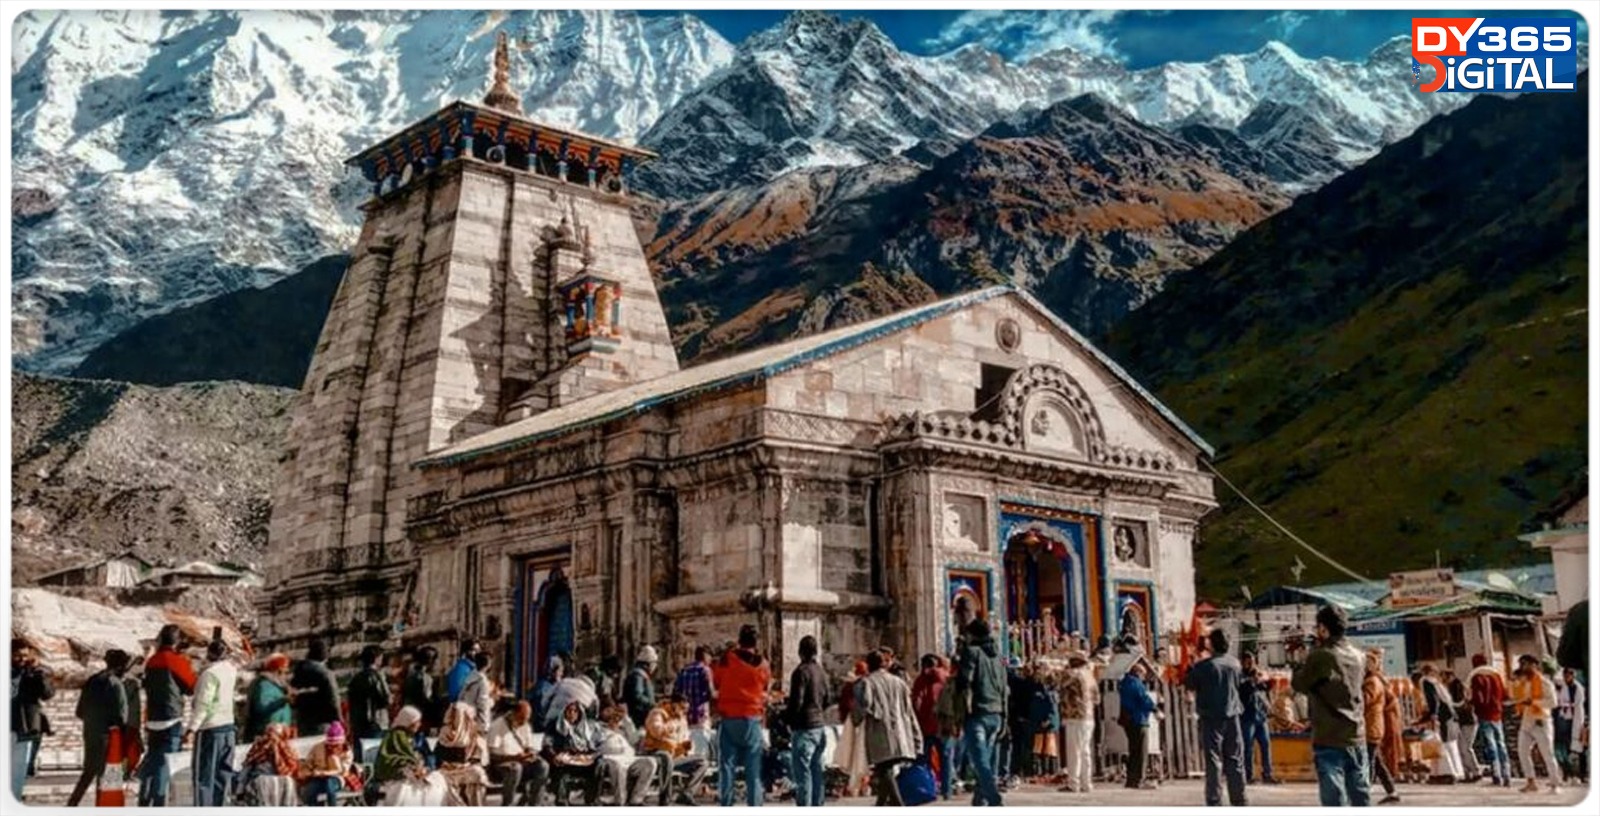 kedarnath-dham-to-reopen-on-may-10-for-devotees-